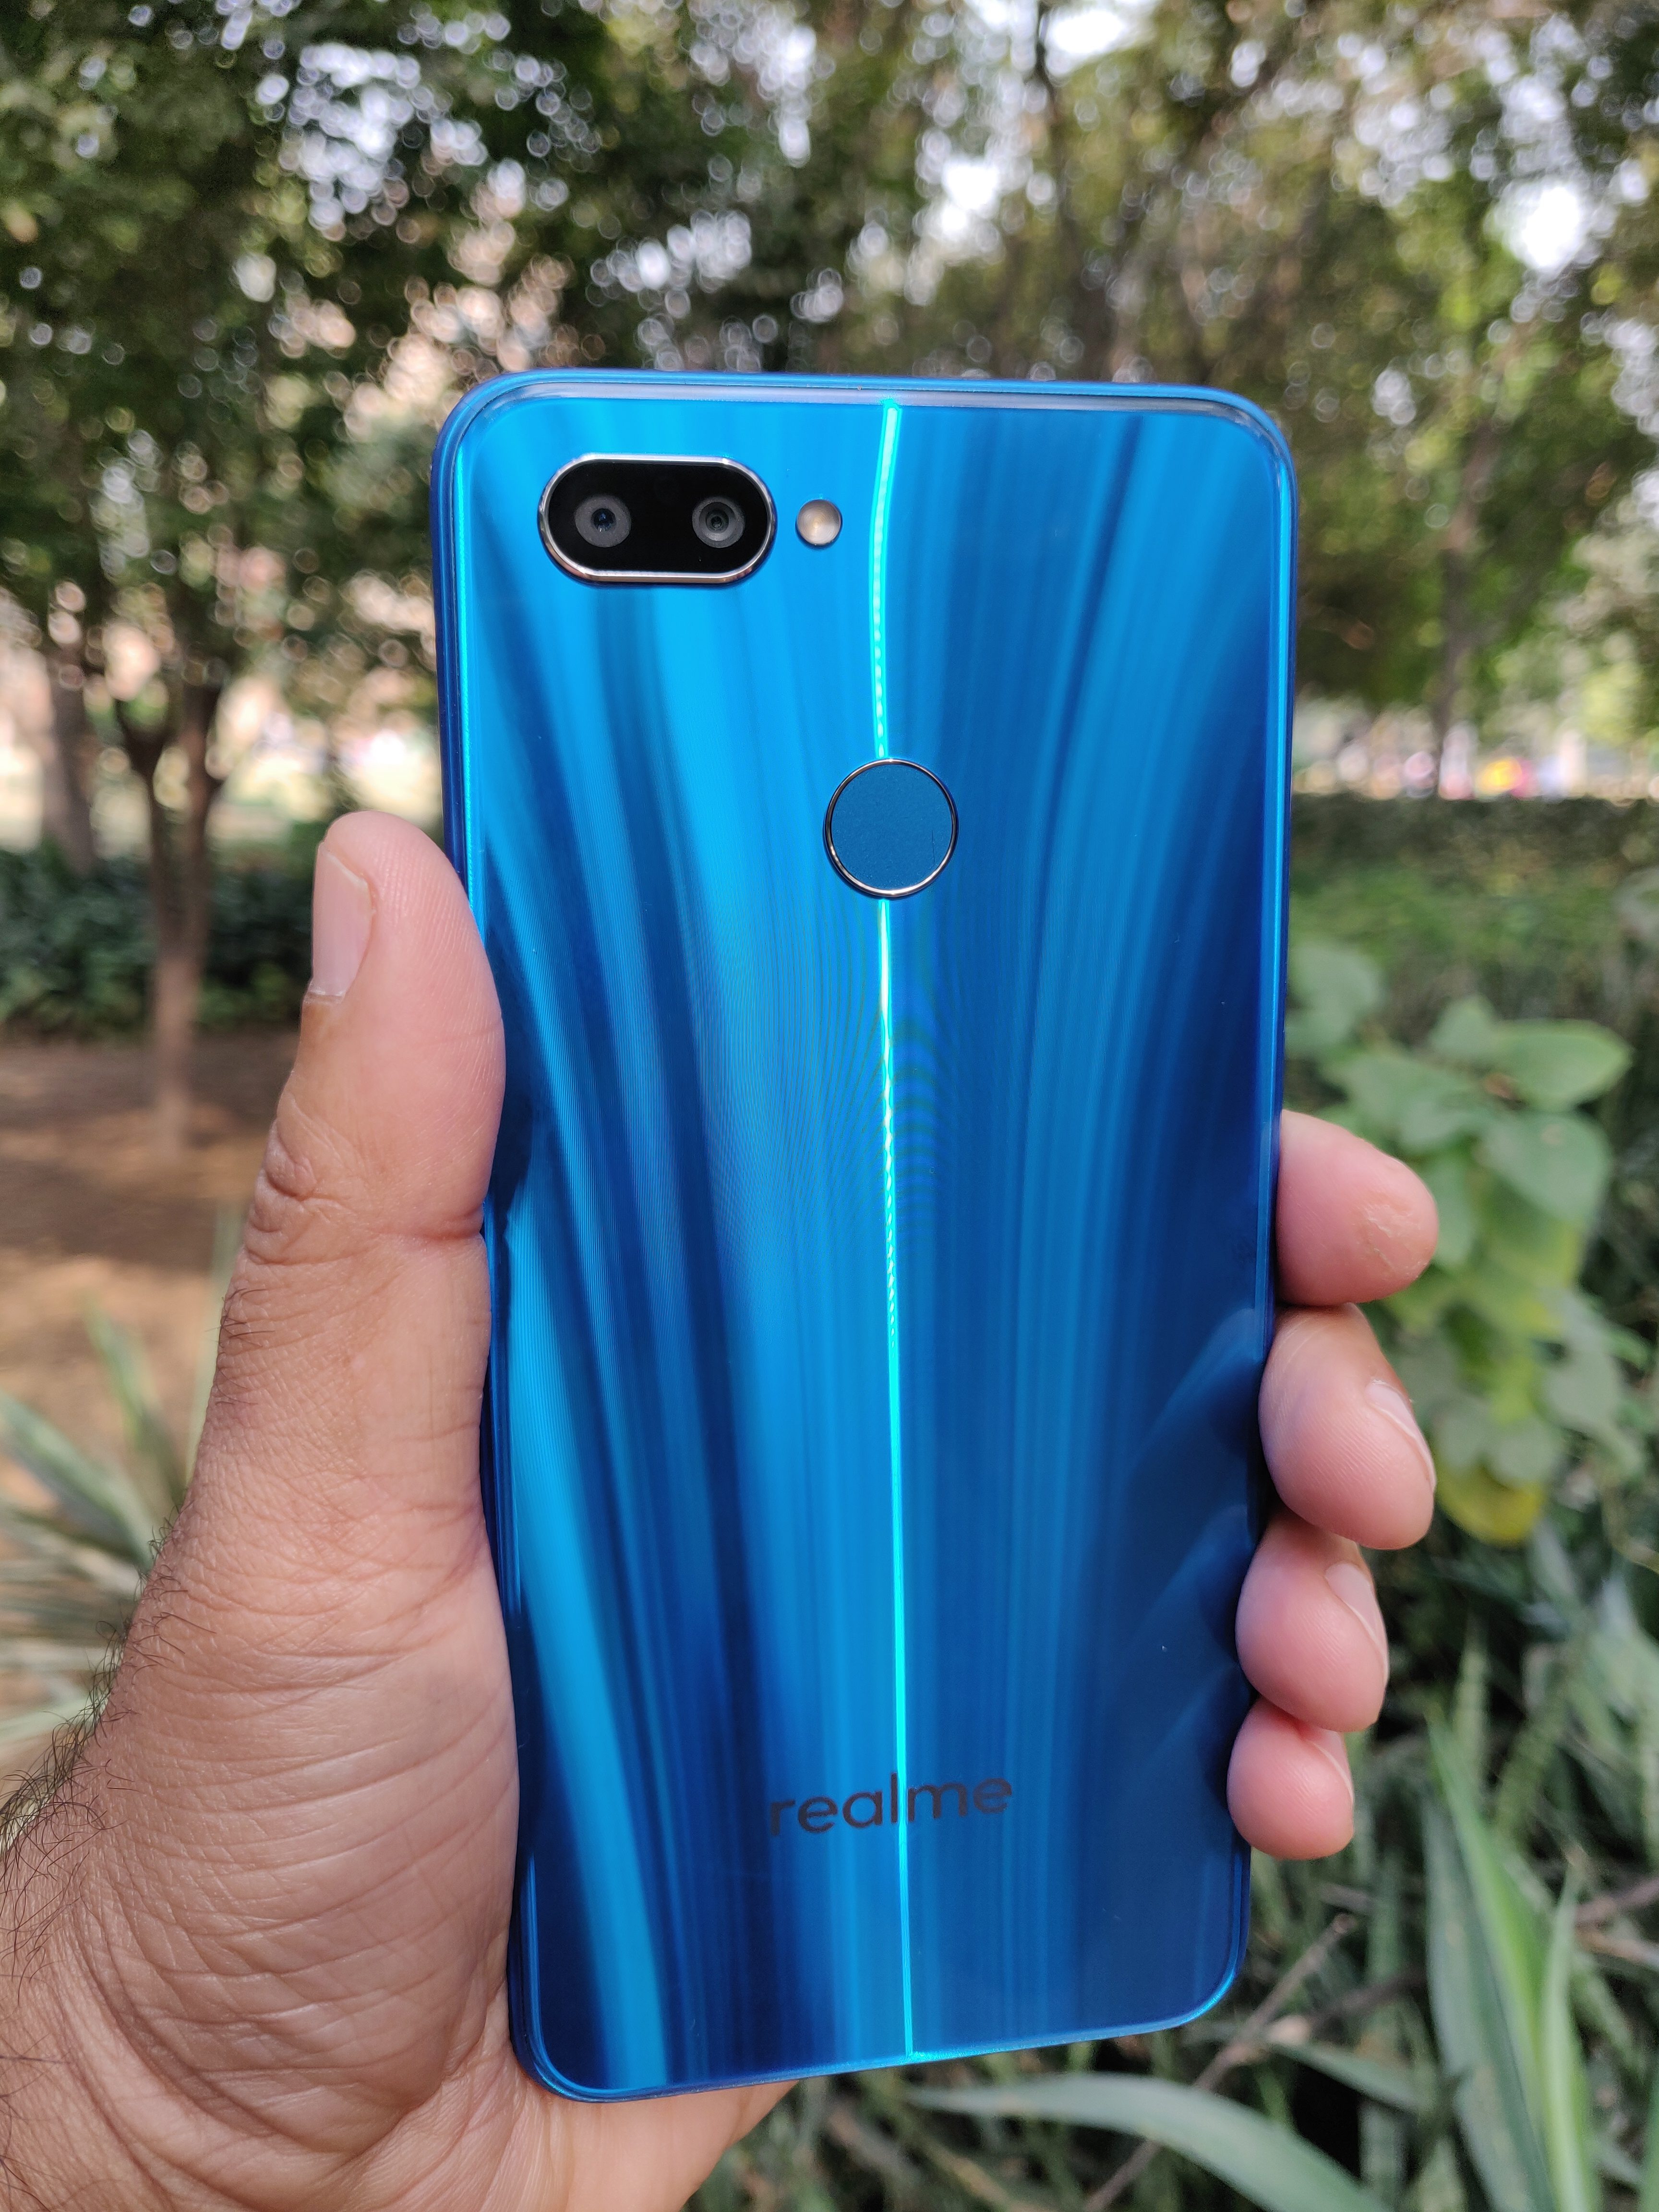 OPPO R17 Pro: The Innovation Powerhouse marvels again!